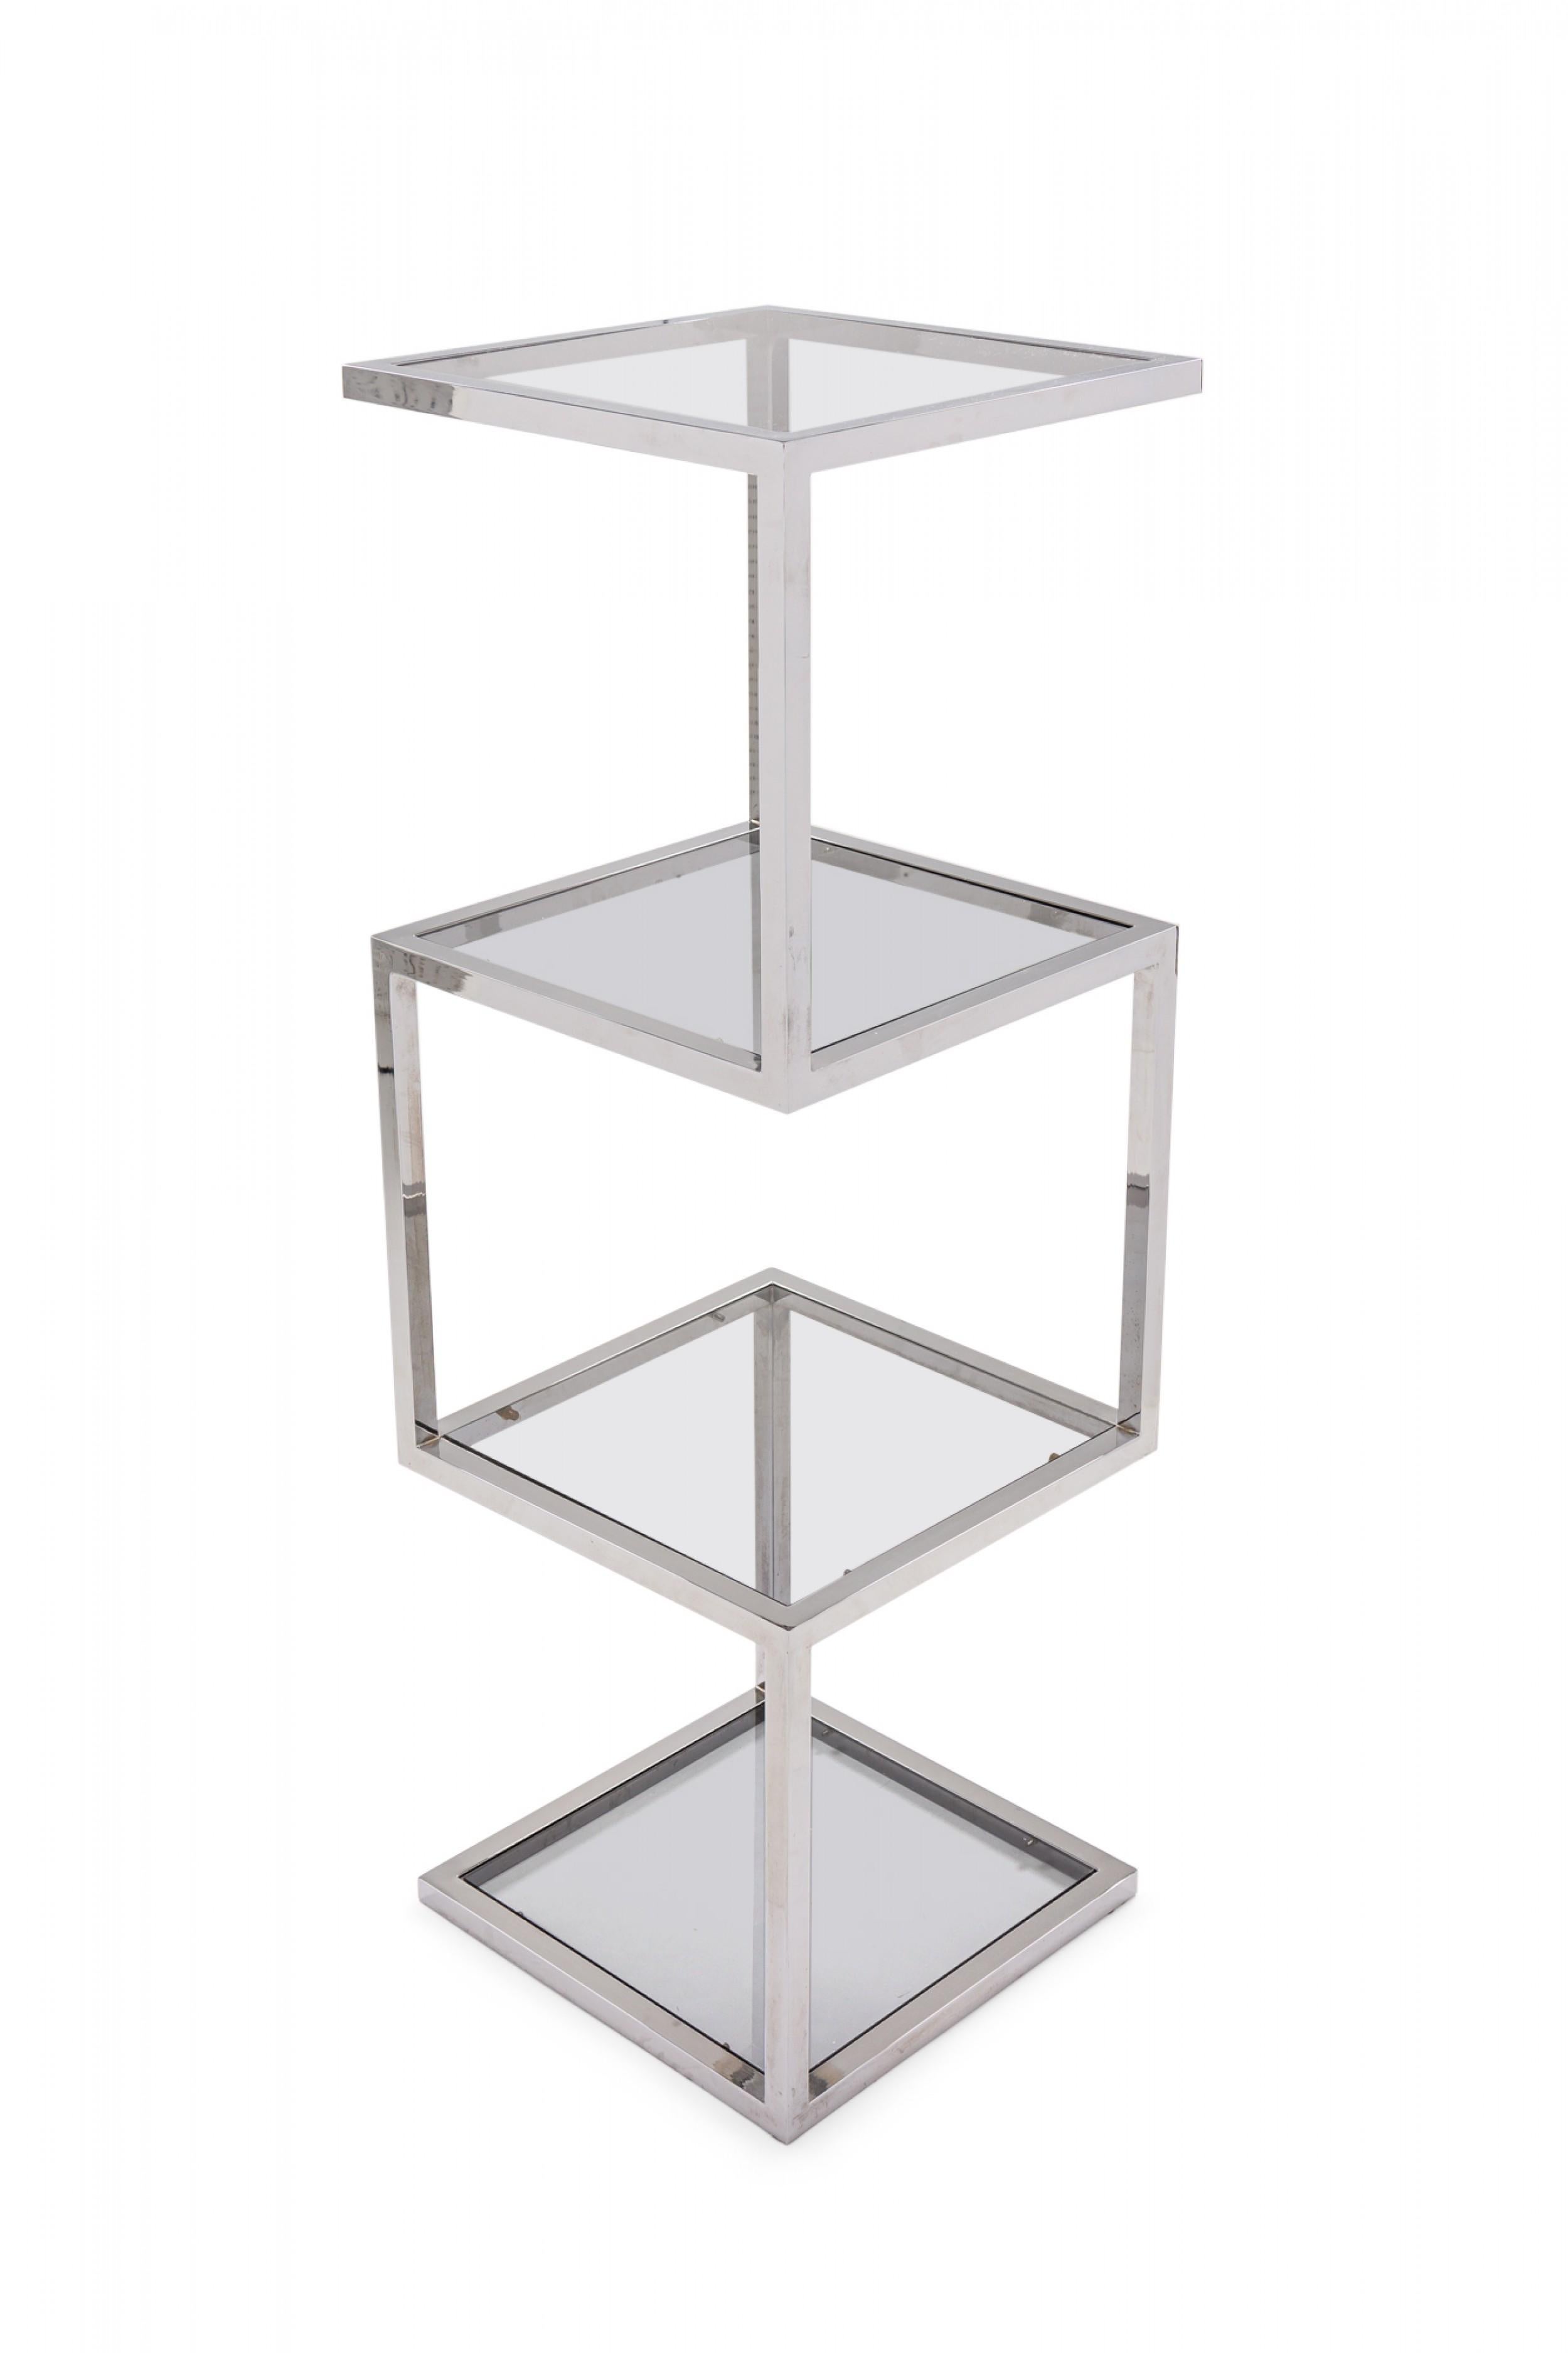 American Mid-Century Modern etagere / display shelf with a geometric form polished chrome plated steel frame and square smoked glass shelves.